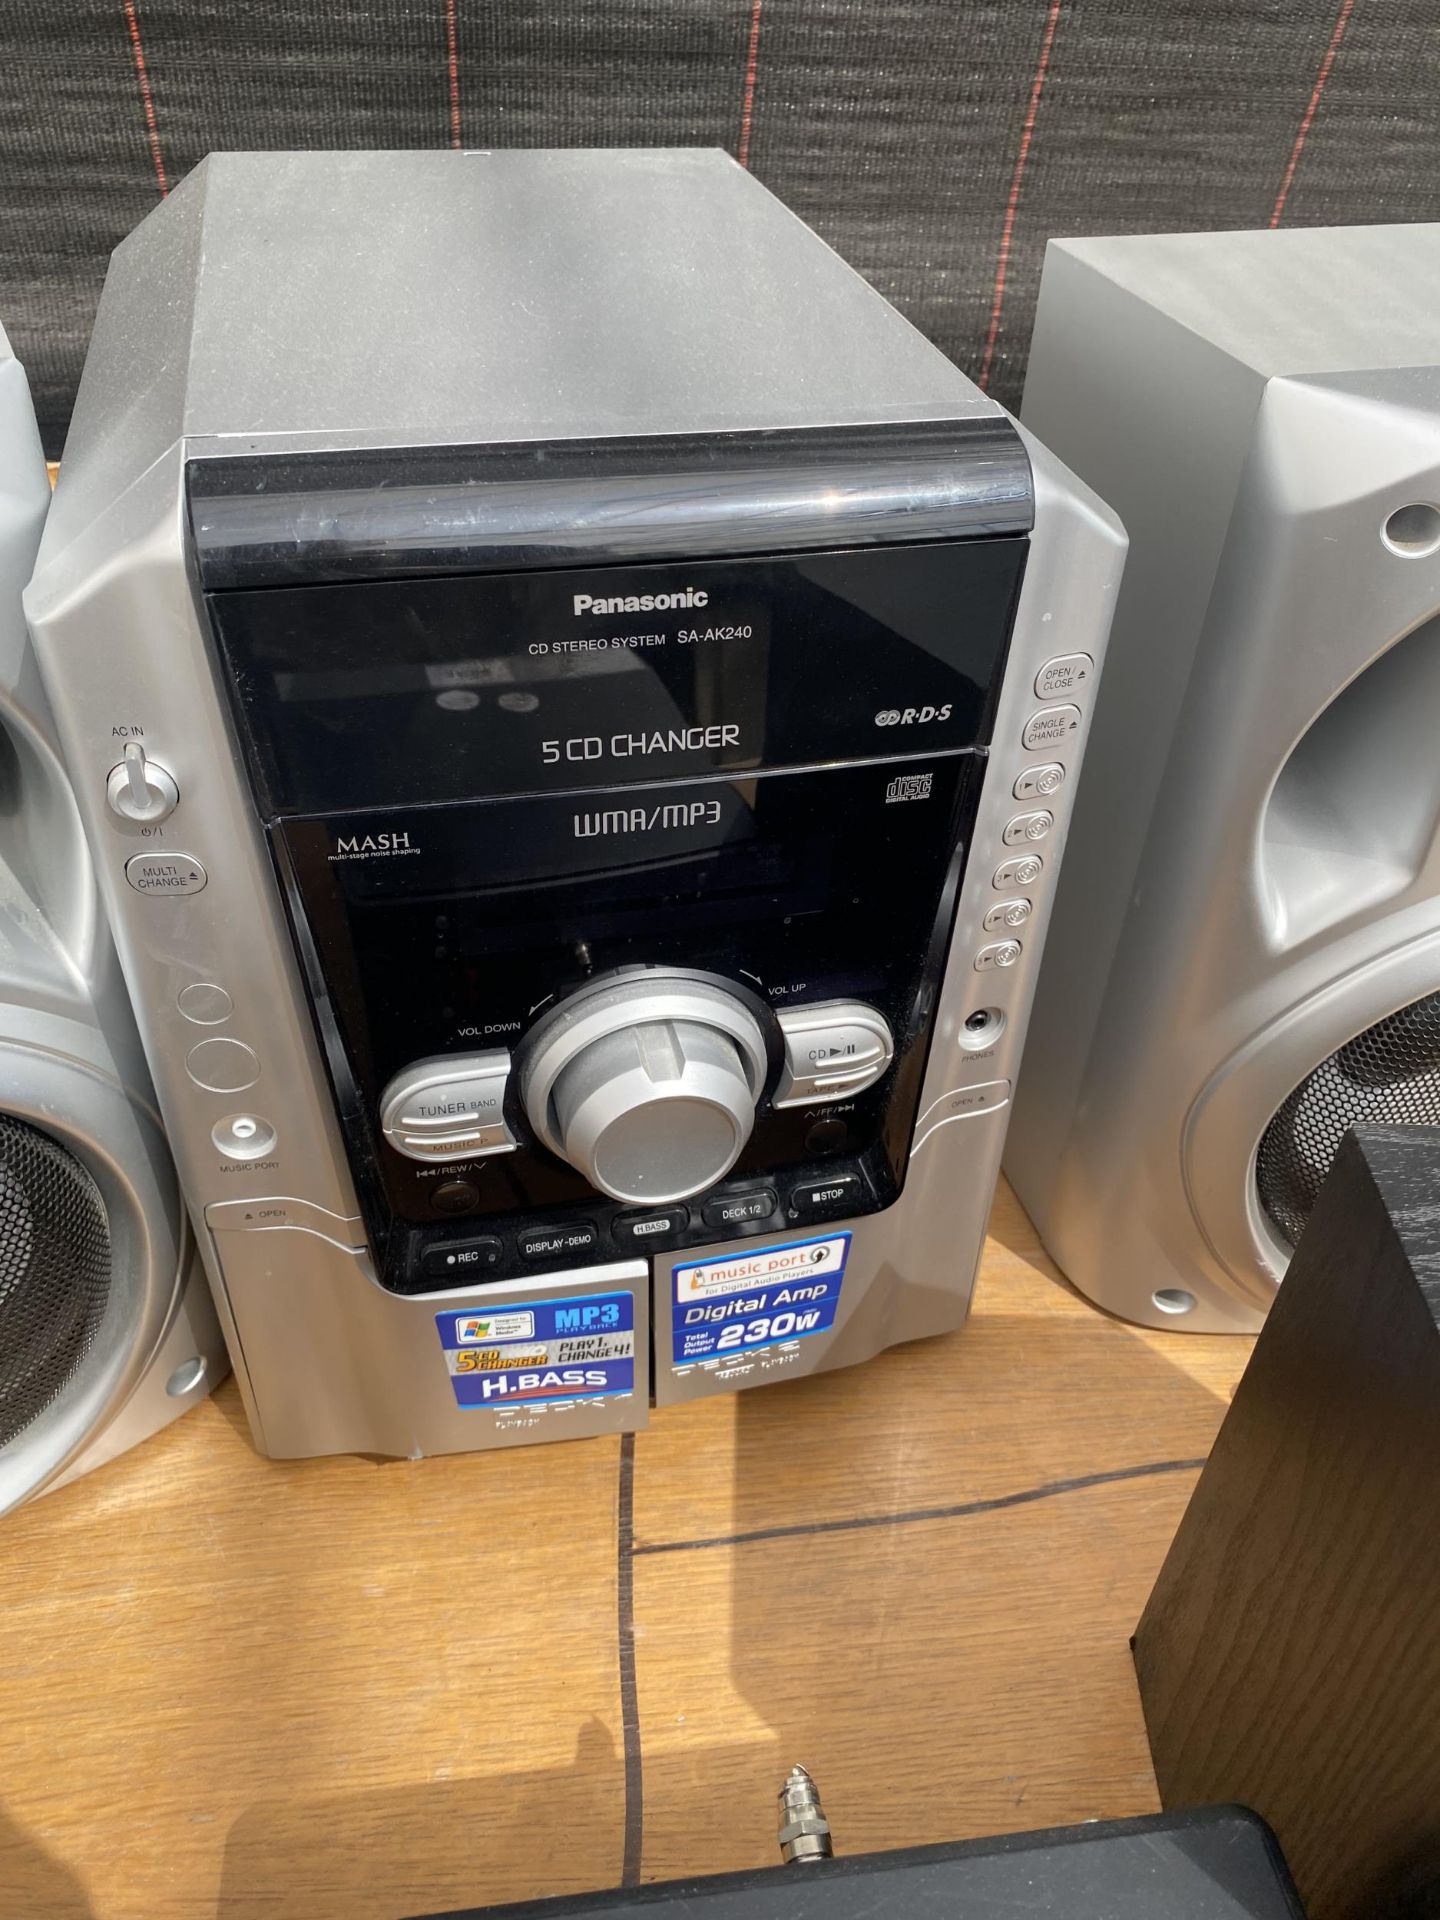 A PANASONIC 5 CD CHANGER STEREO SYSTEM AND A FURTHER PANASONIC STEREO SYSTEM BOTH WITH TWO SPEAKERS - Image 2 of 3